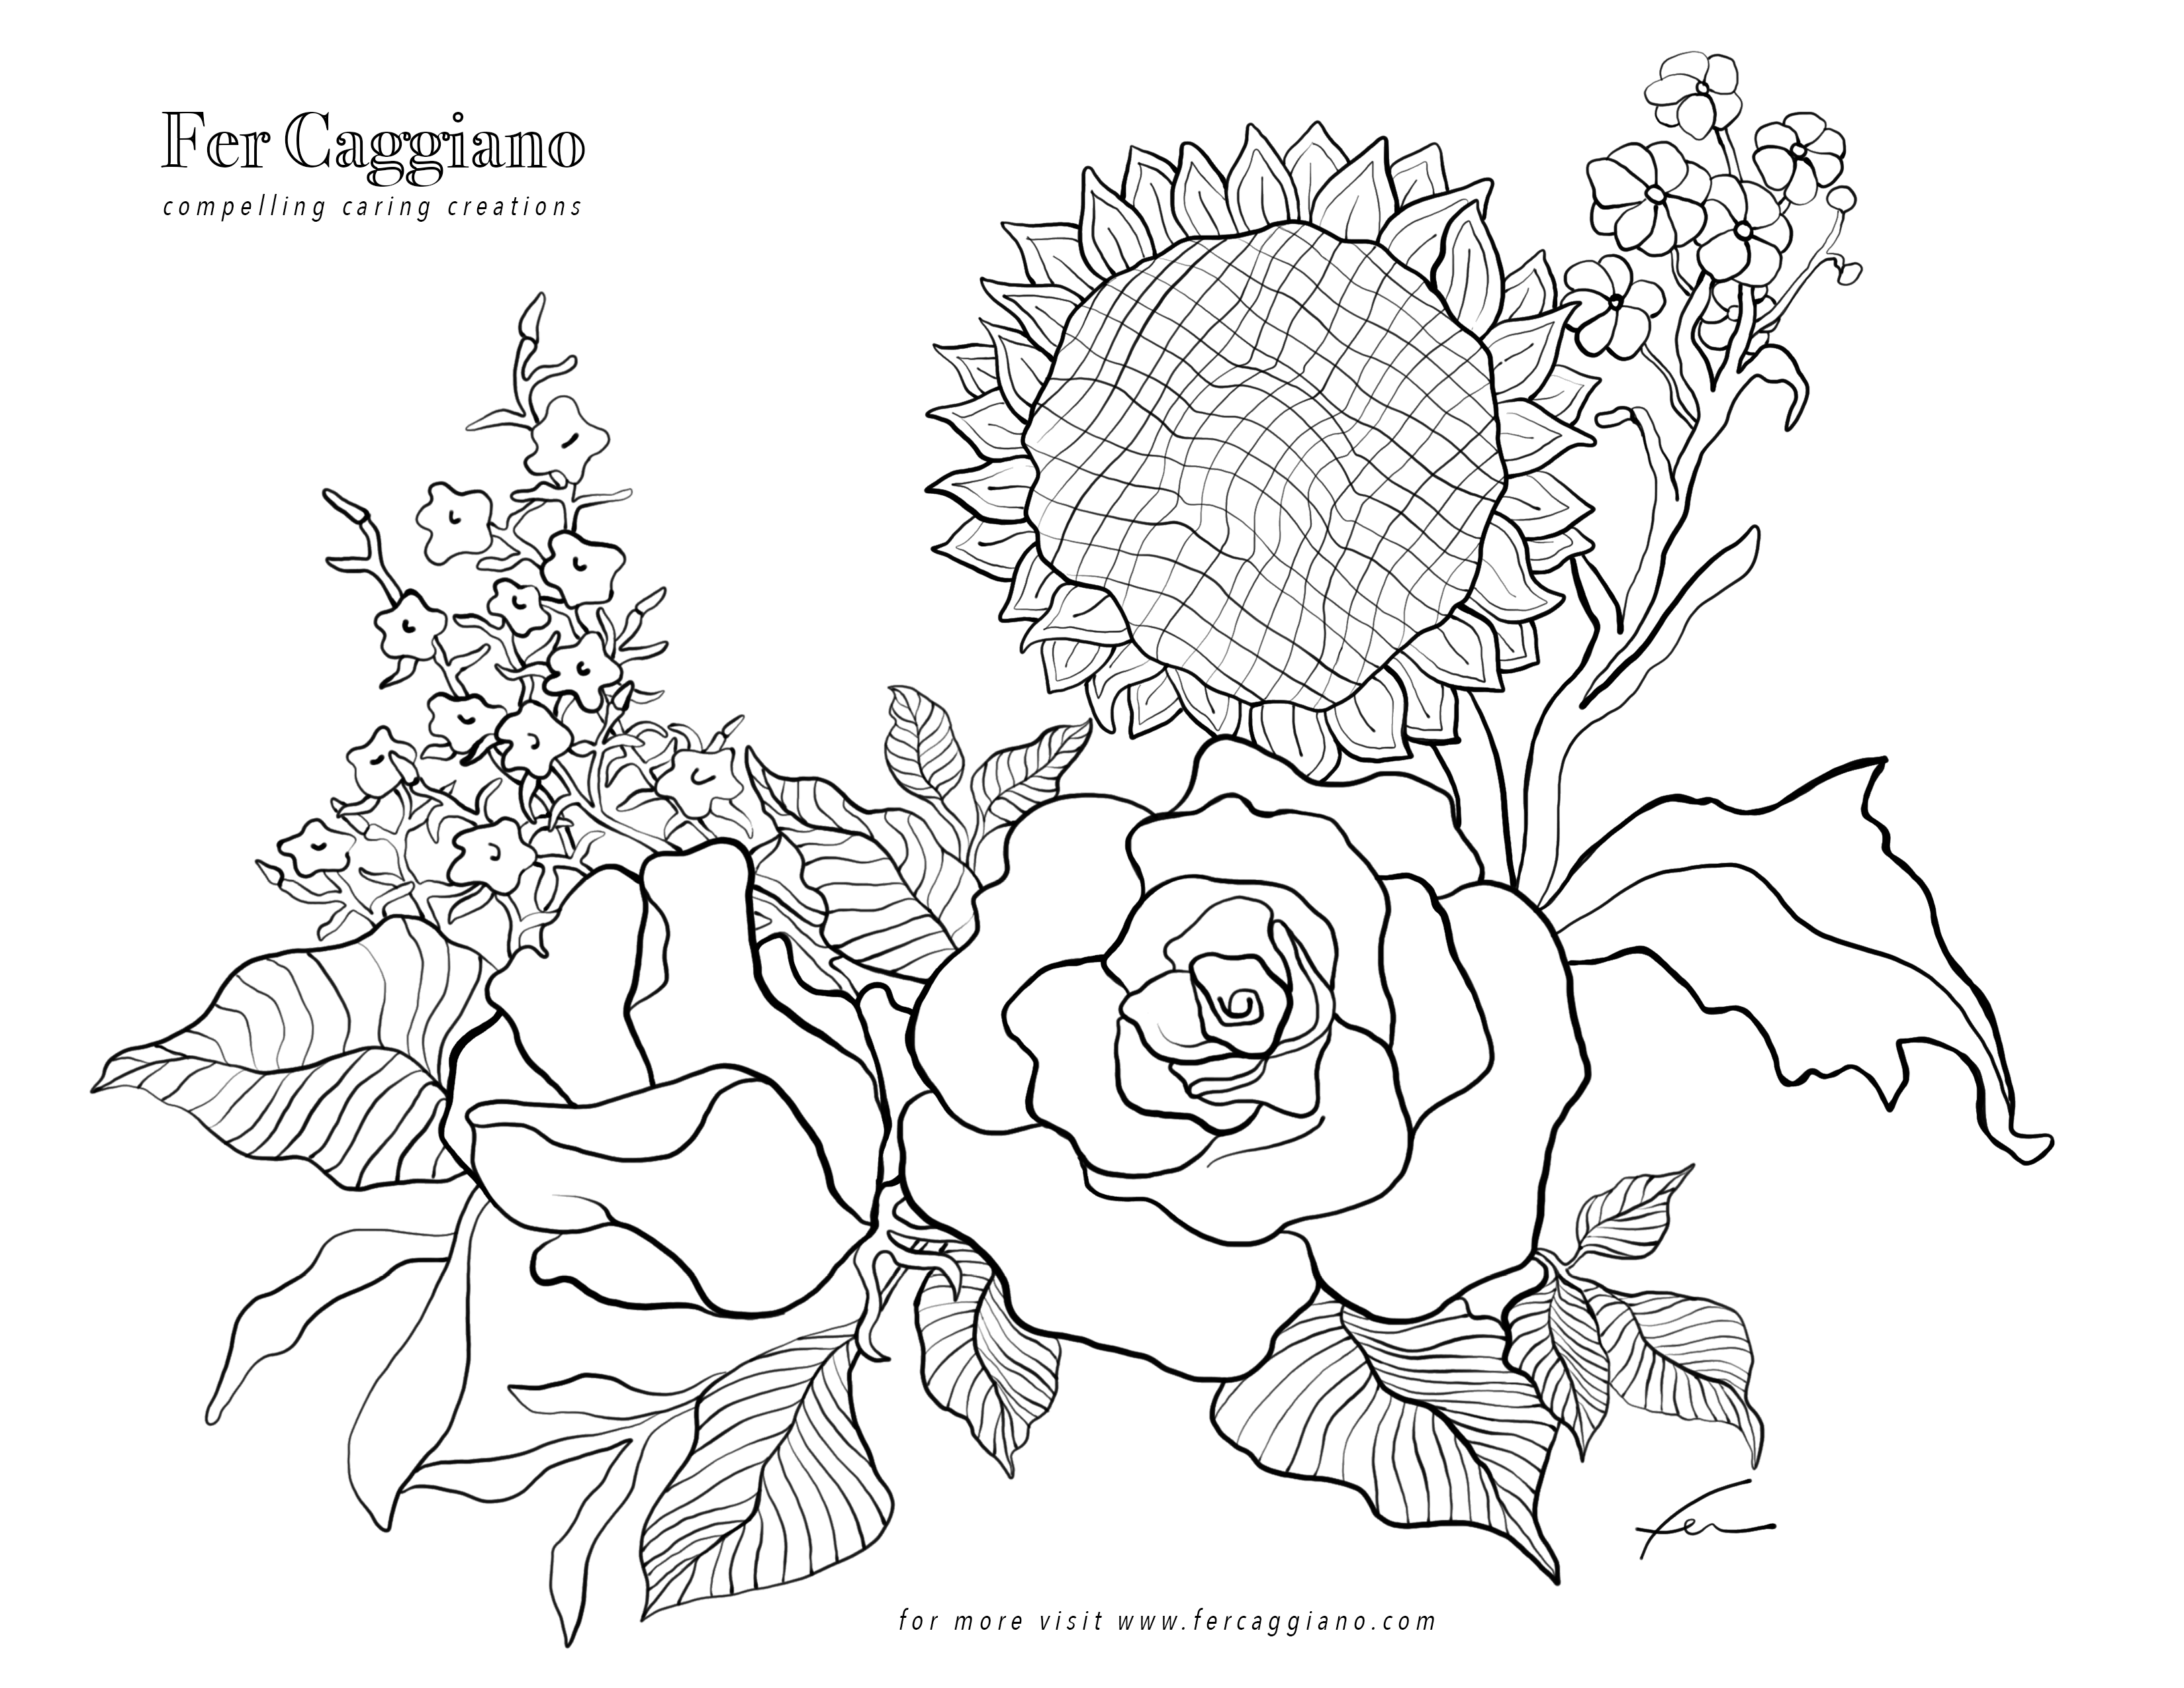 Local artist Fer Caggiano offering free downloadable coloring pages during  coronavirus